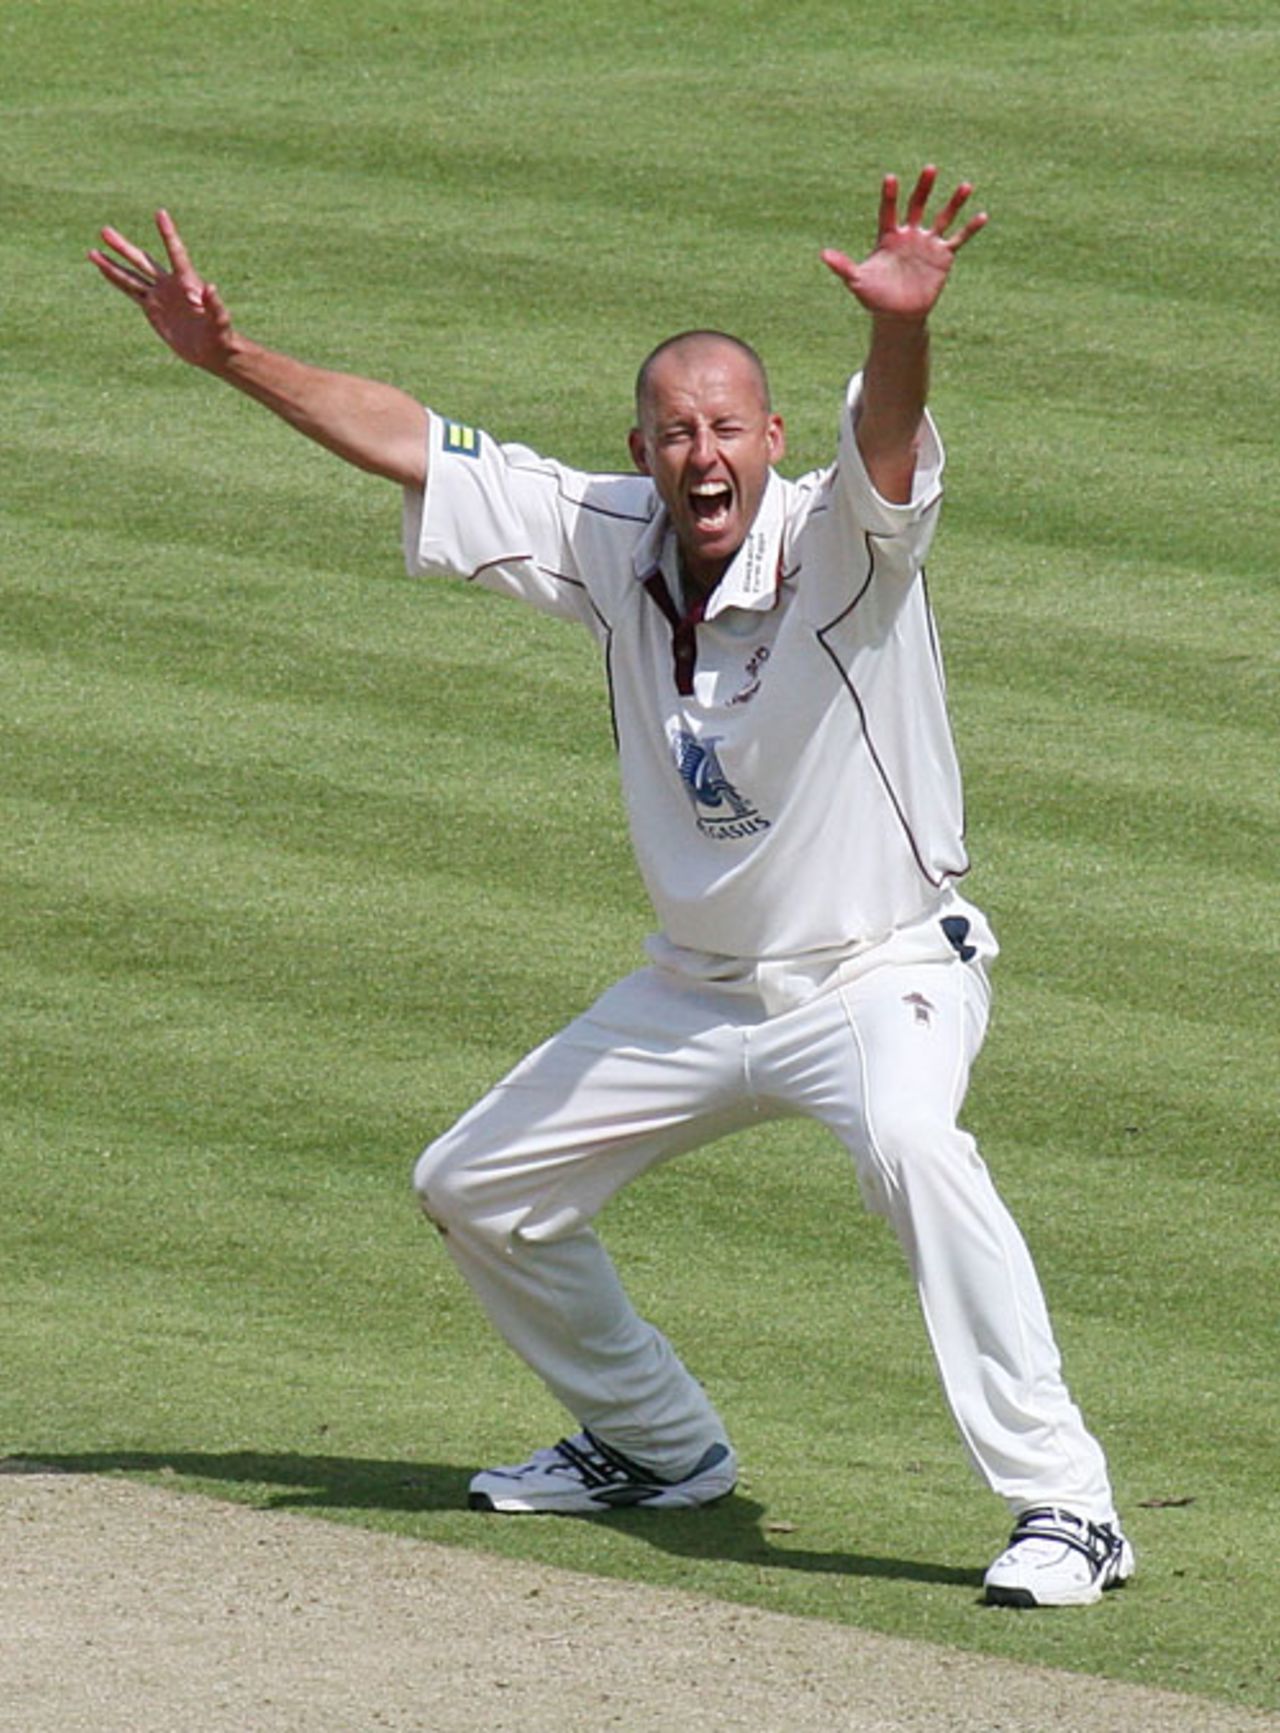 Charl Willoughby appeals - successfully - for lbw against Ed Smith, Middlesex v Somerset, Lord's, May 31, 2007